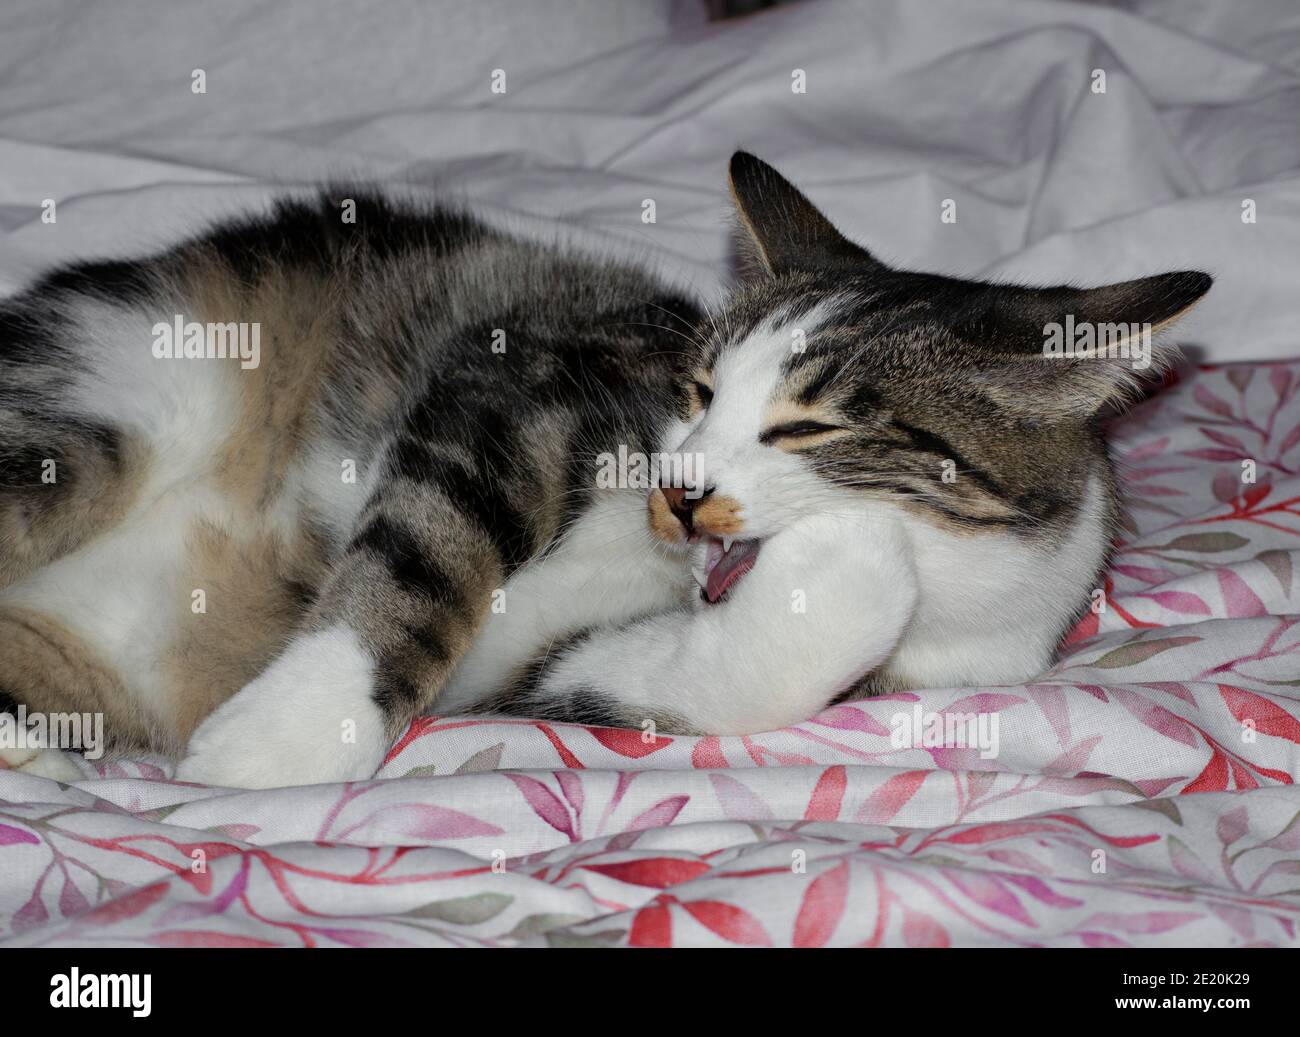 portrait of a cat lying on the bed wiping a paw Stock Photo